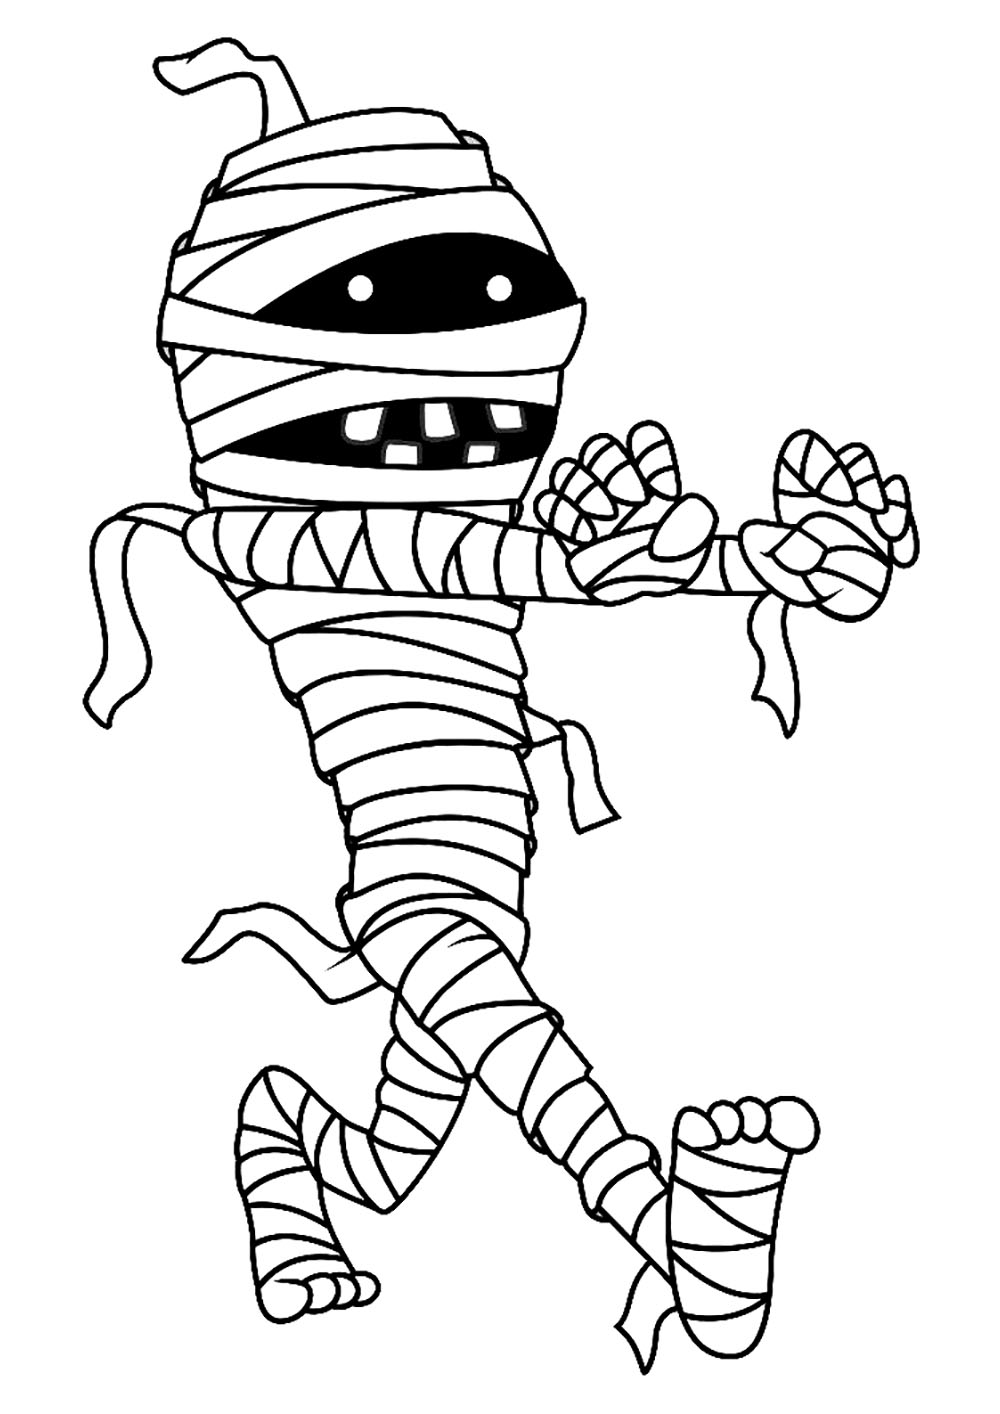 Mummy - Halloween Kids Coloring Pages